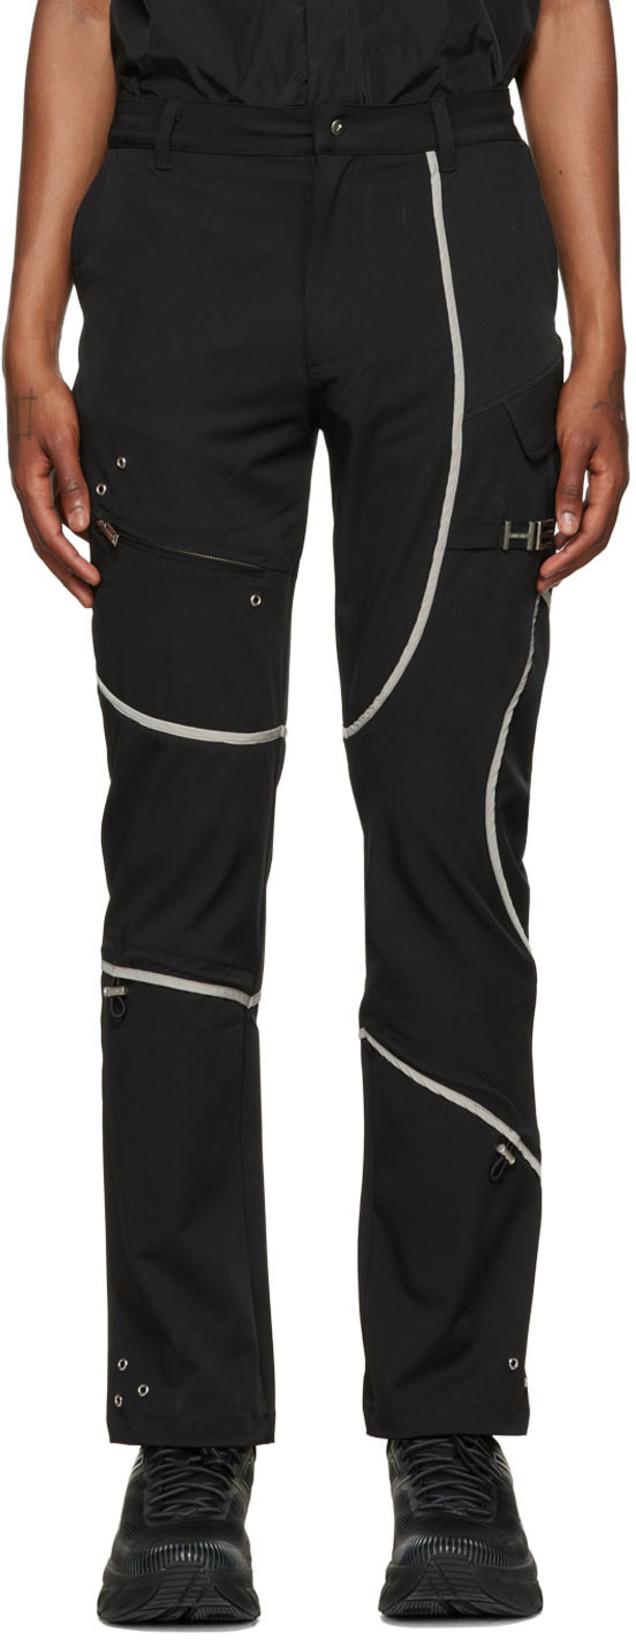 Black Layered Cargo Pants by HELIOT EMIL